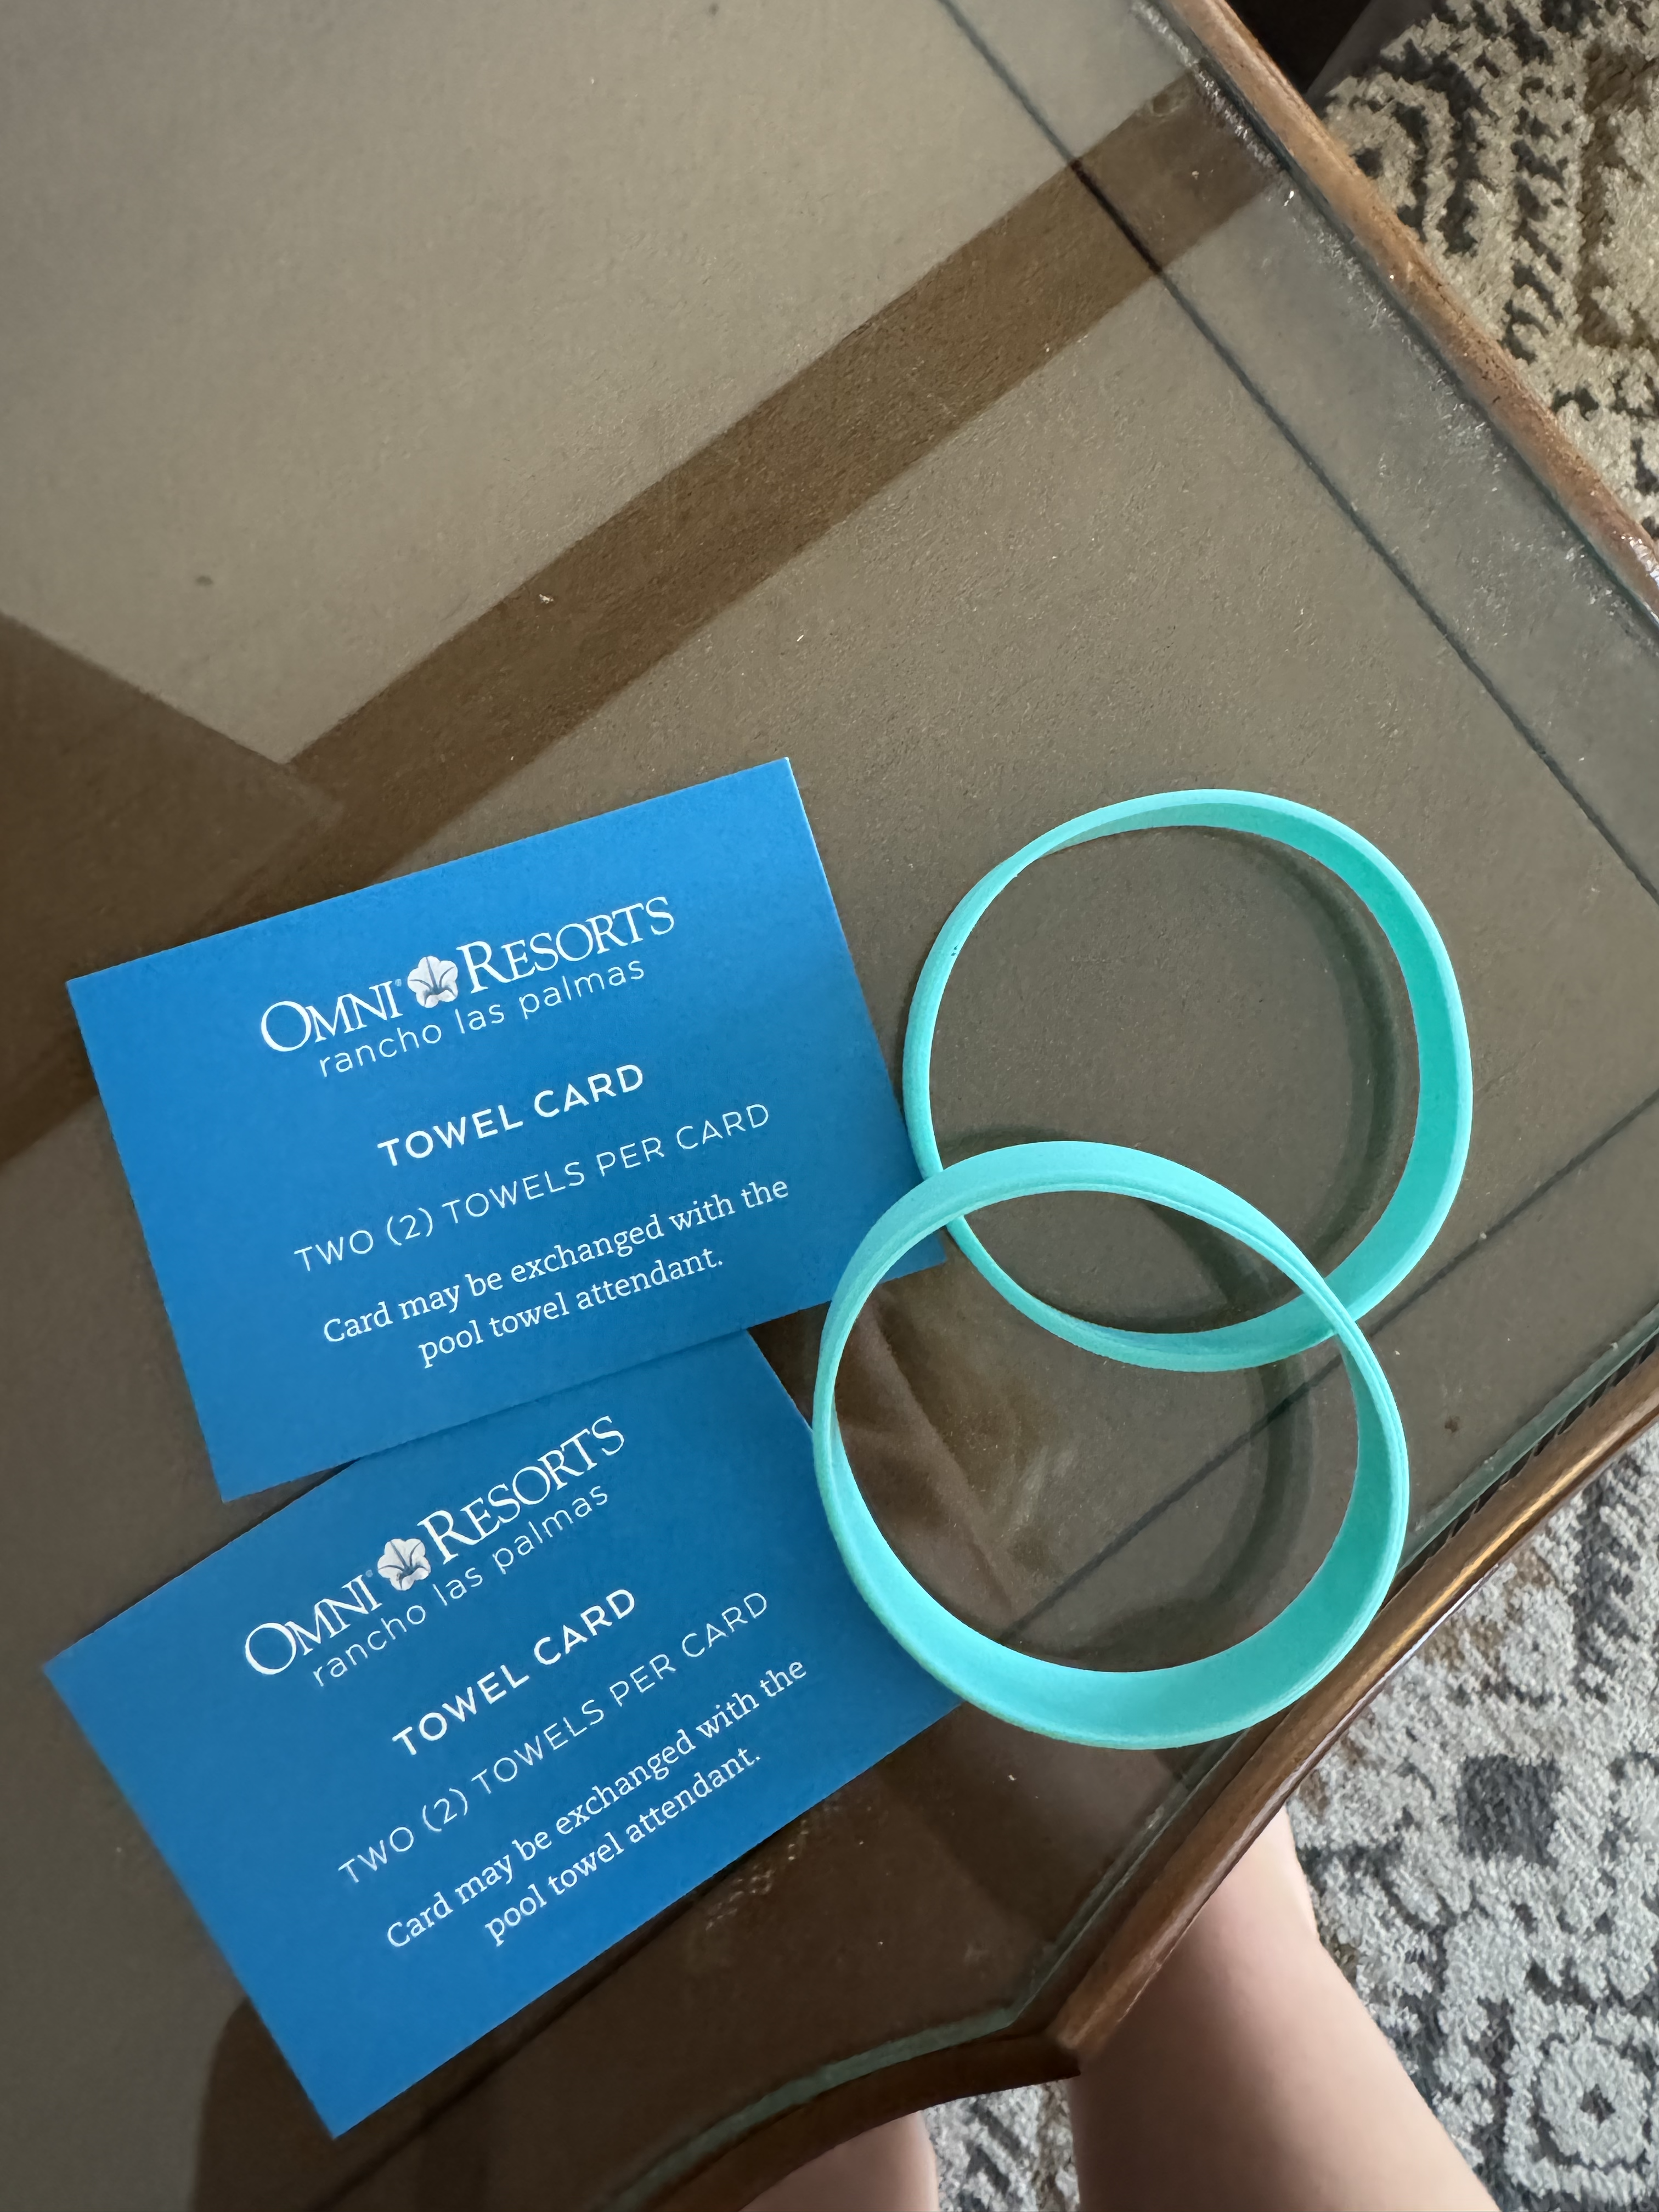 Two blue cards on a surface with text about towel exchange policy at Omni Resorts, accompanied by two teal wristbands